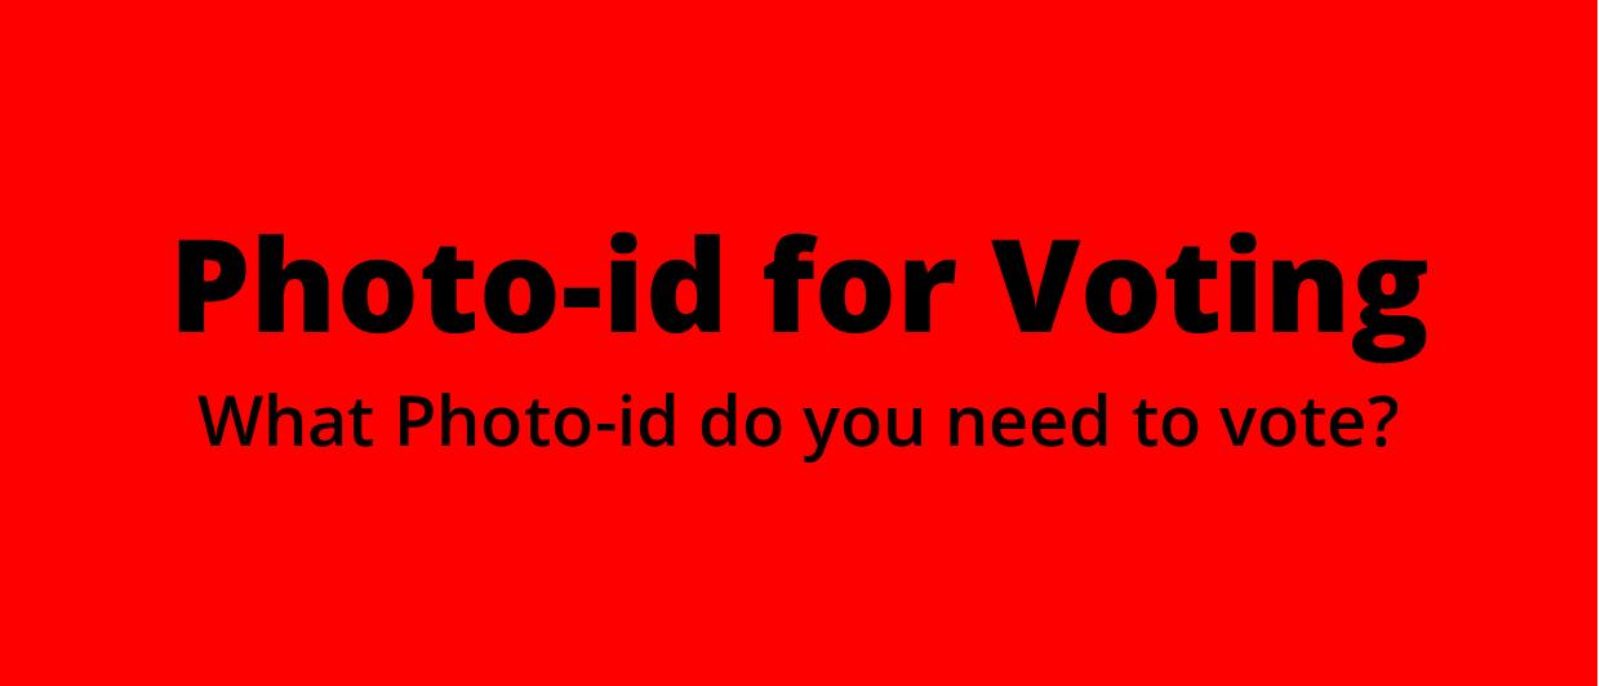 Photo-id for Voting